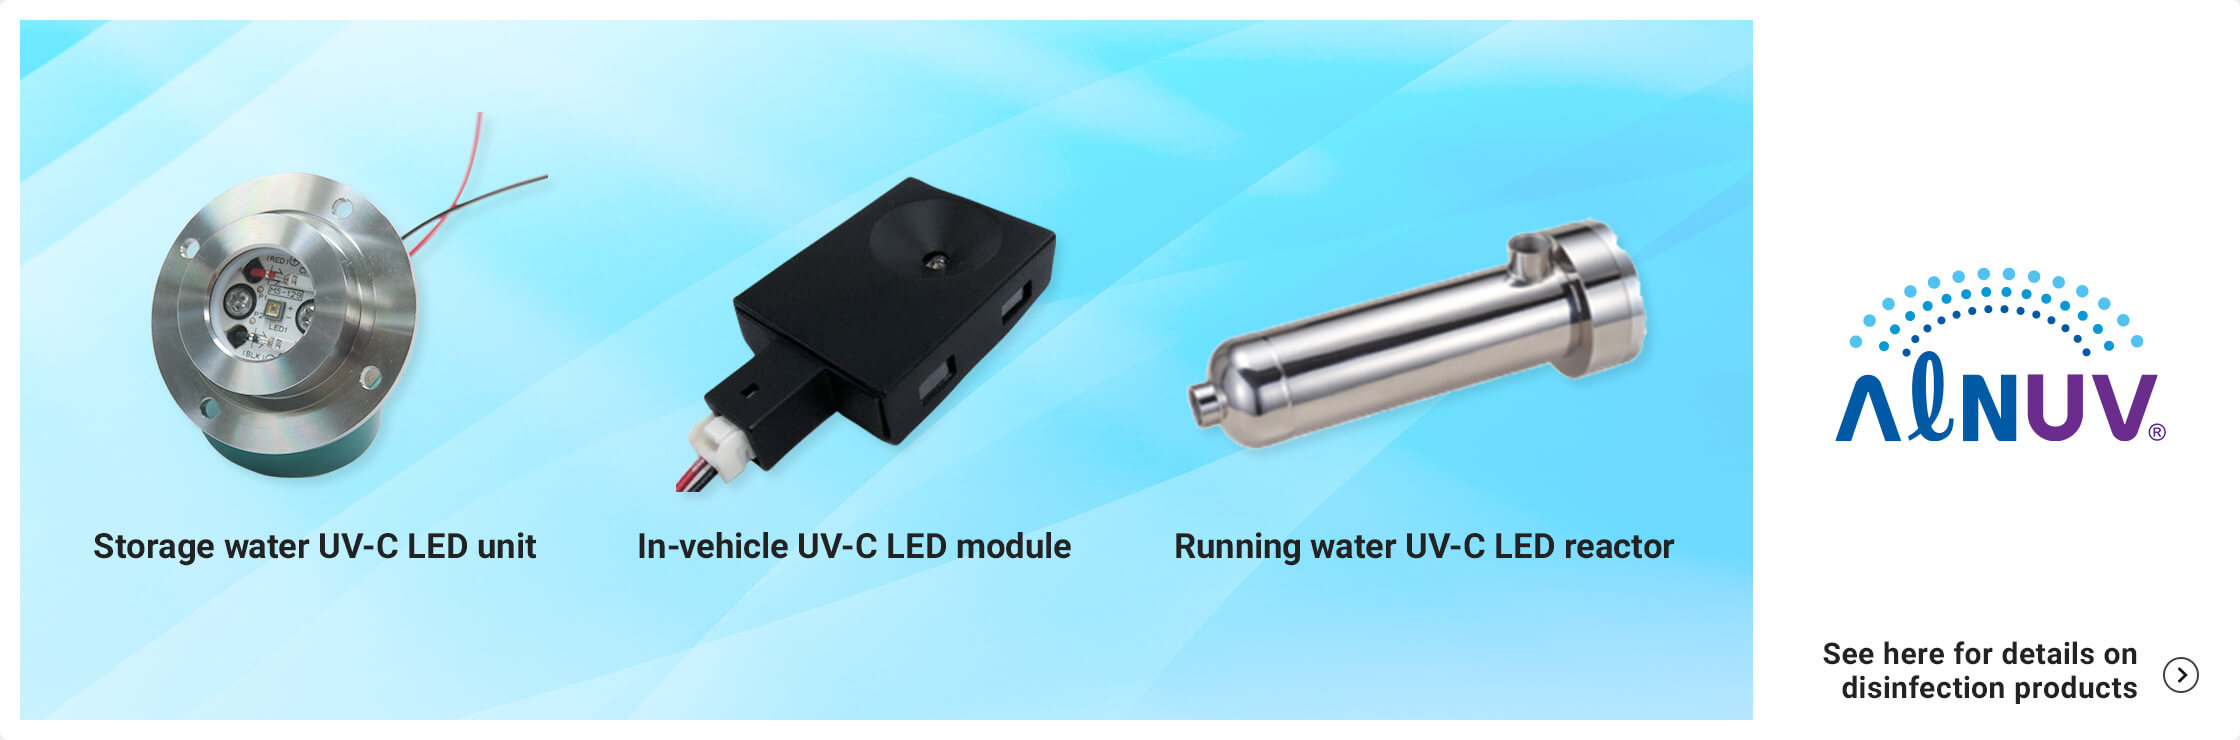 AℓNUV products with deep UV light sources